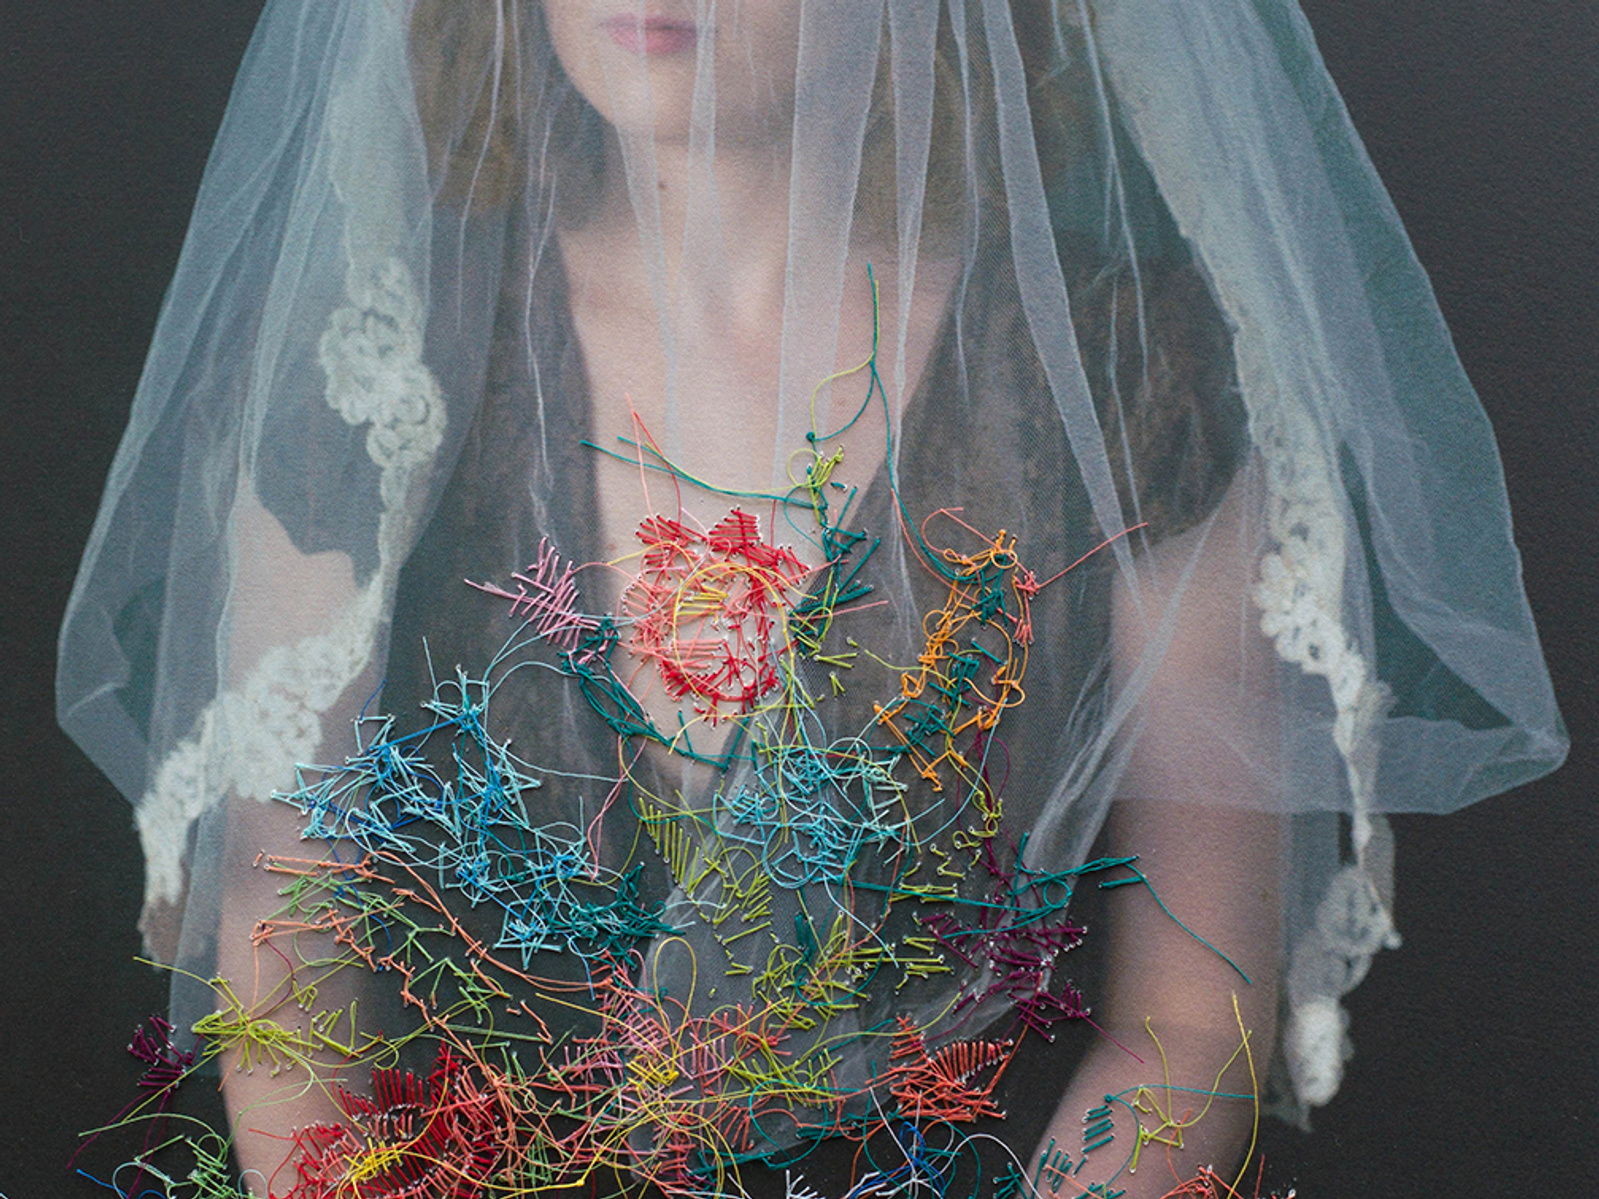 From this Moment On: Embroidered Portraits II - Melissa Zexter Photography